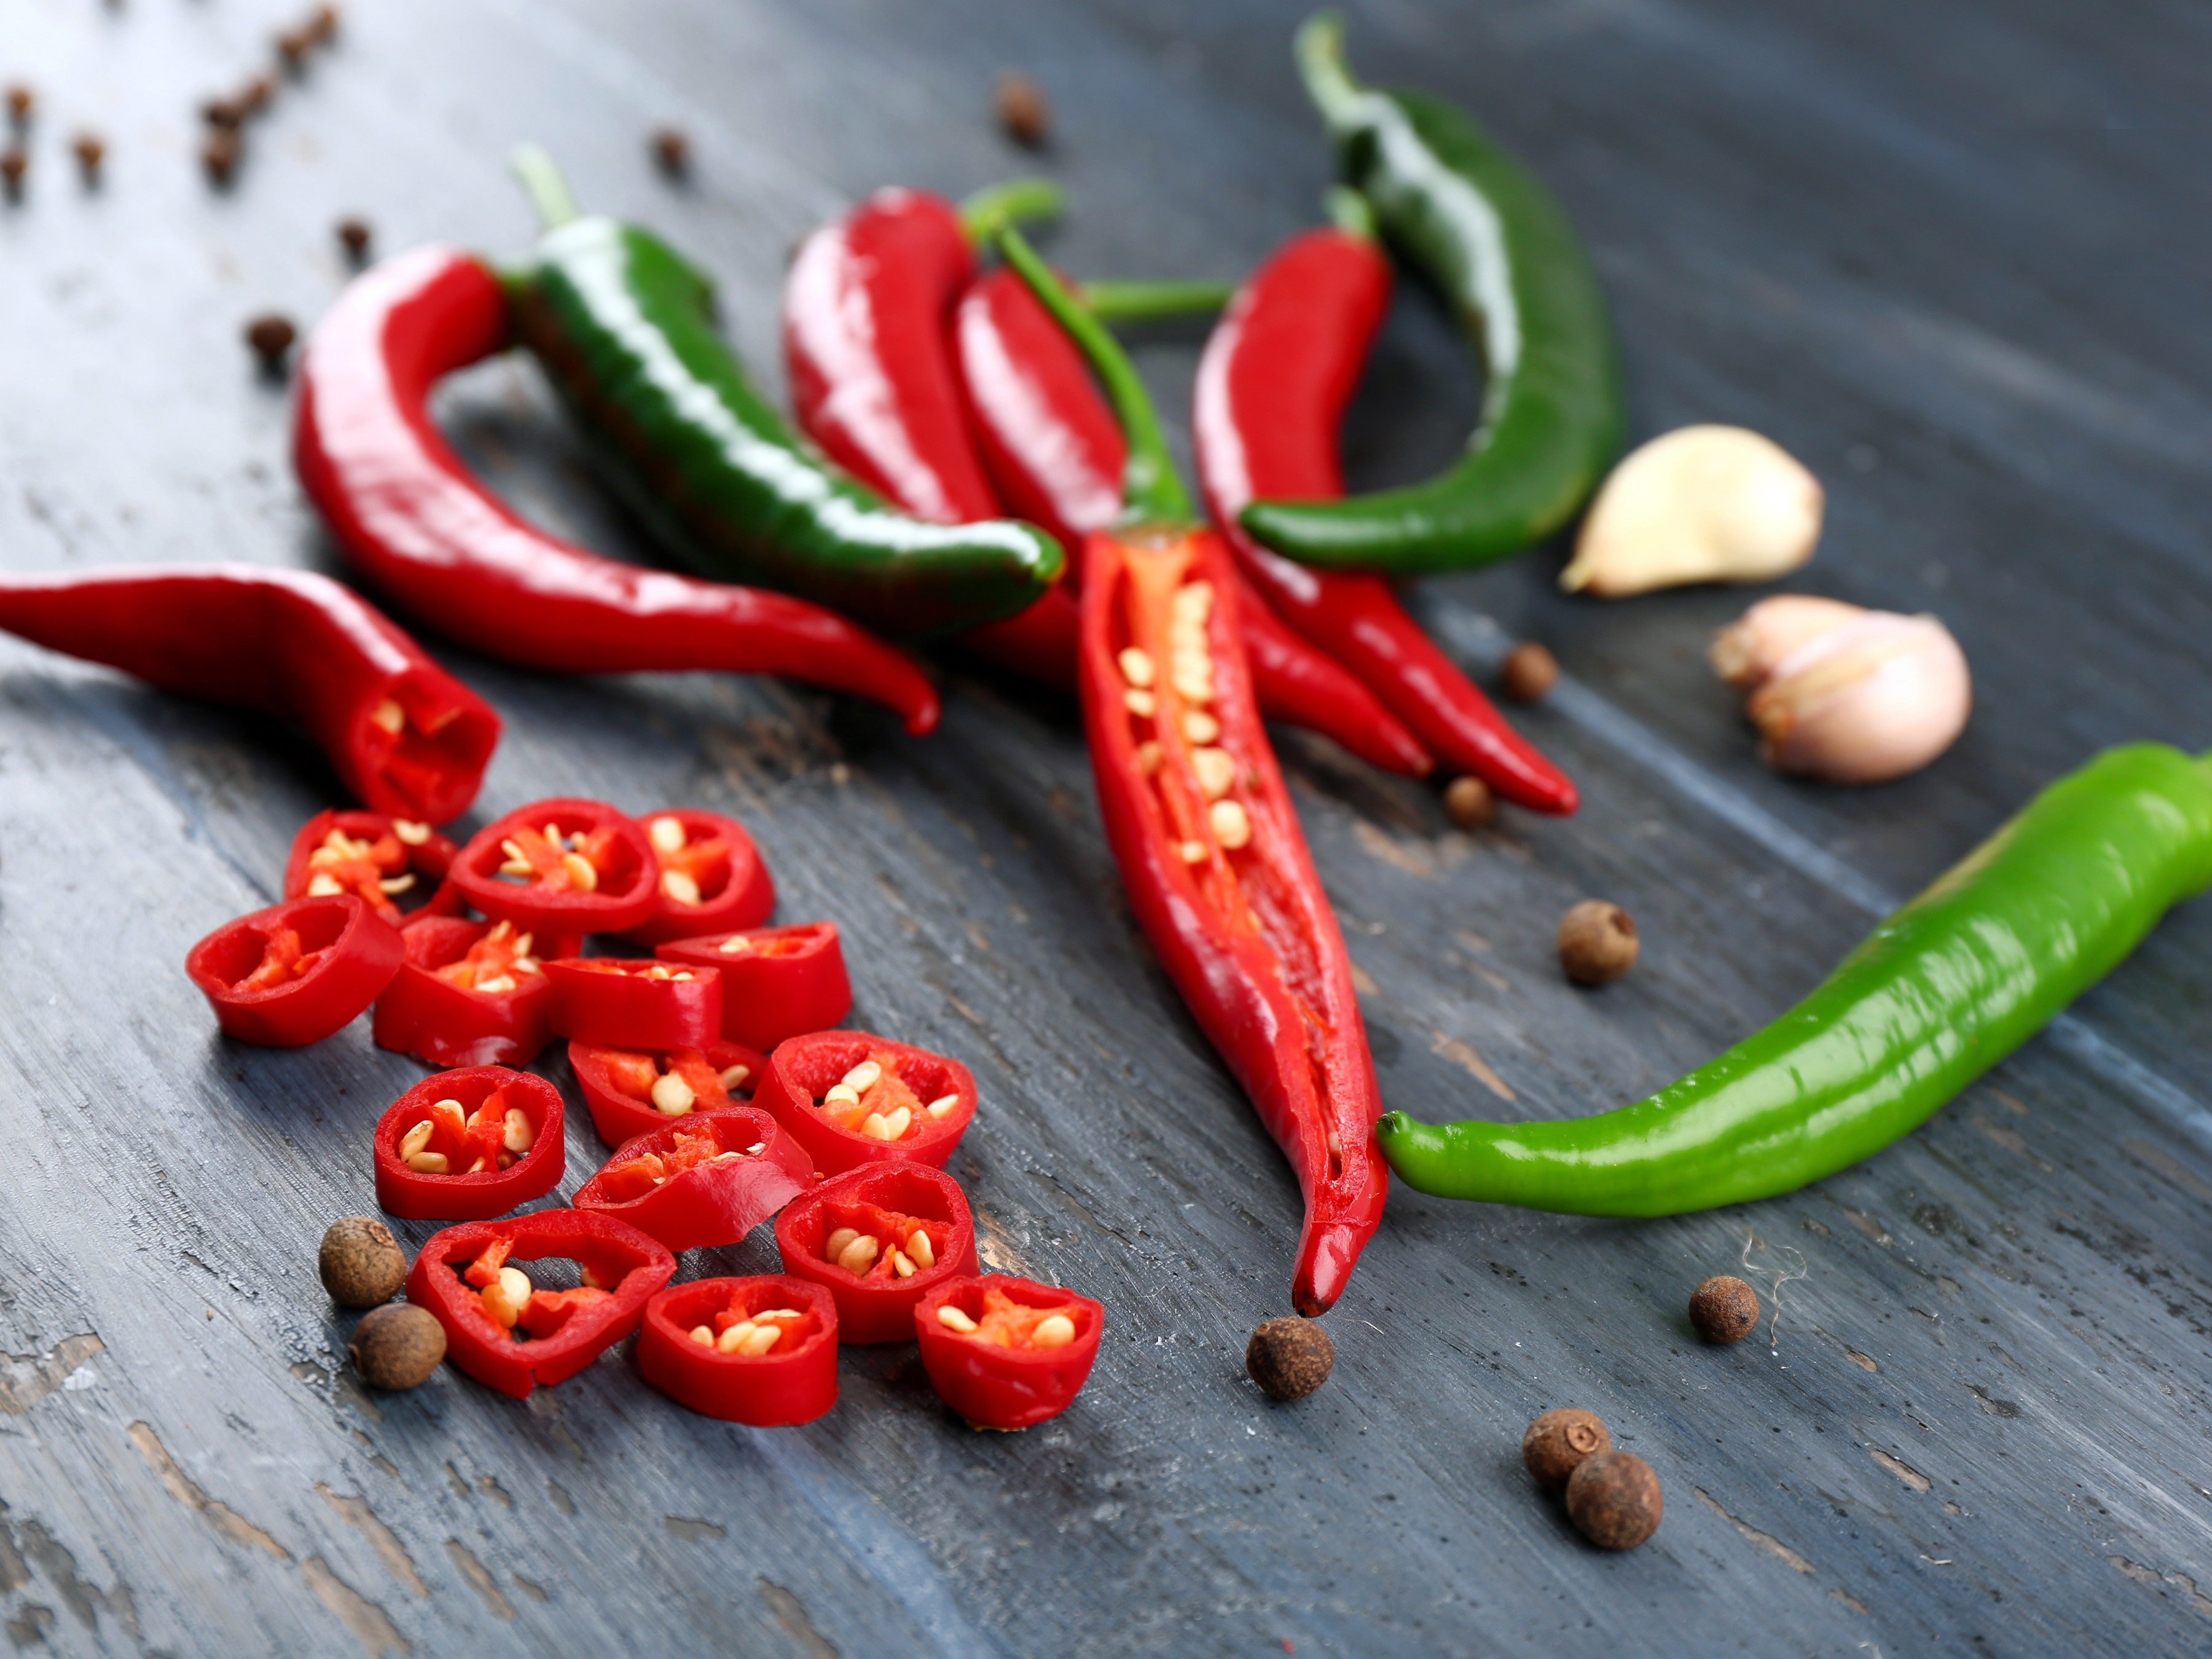 Natural back pain reliever #2: Capsaicin patch